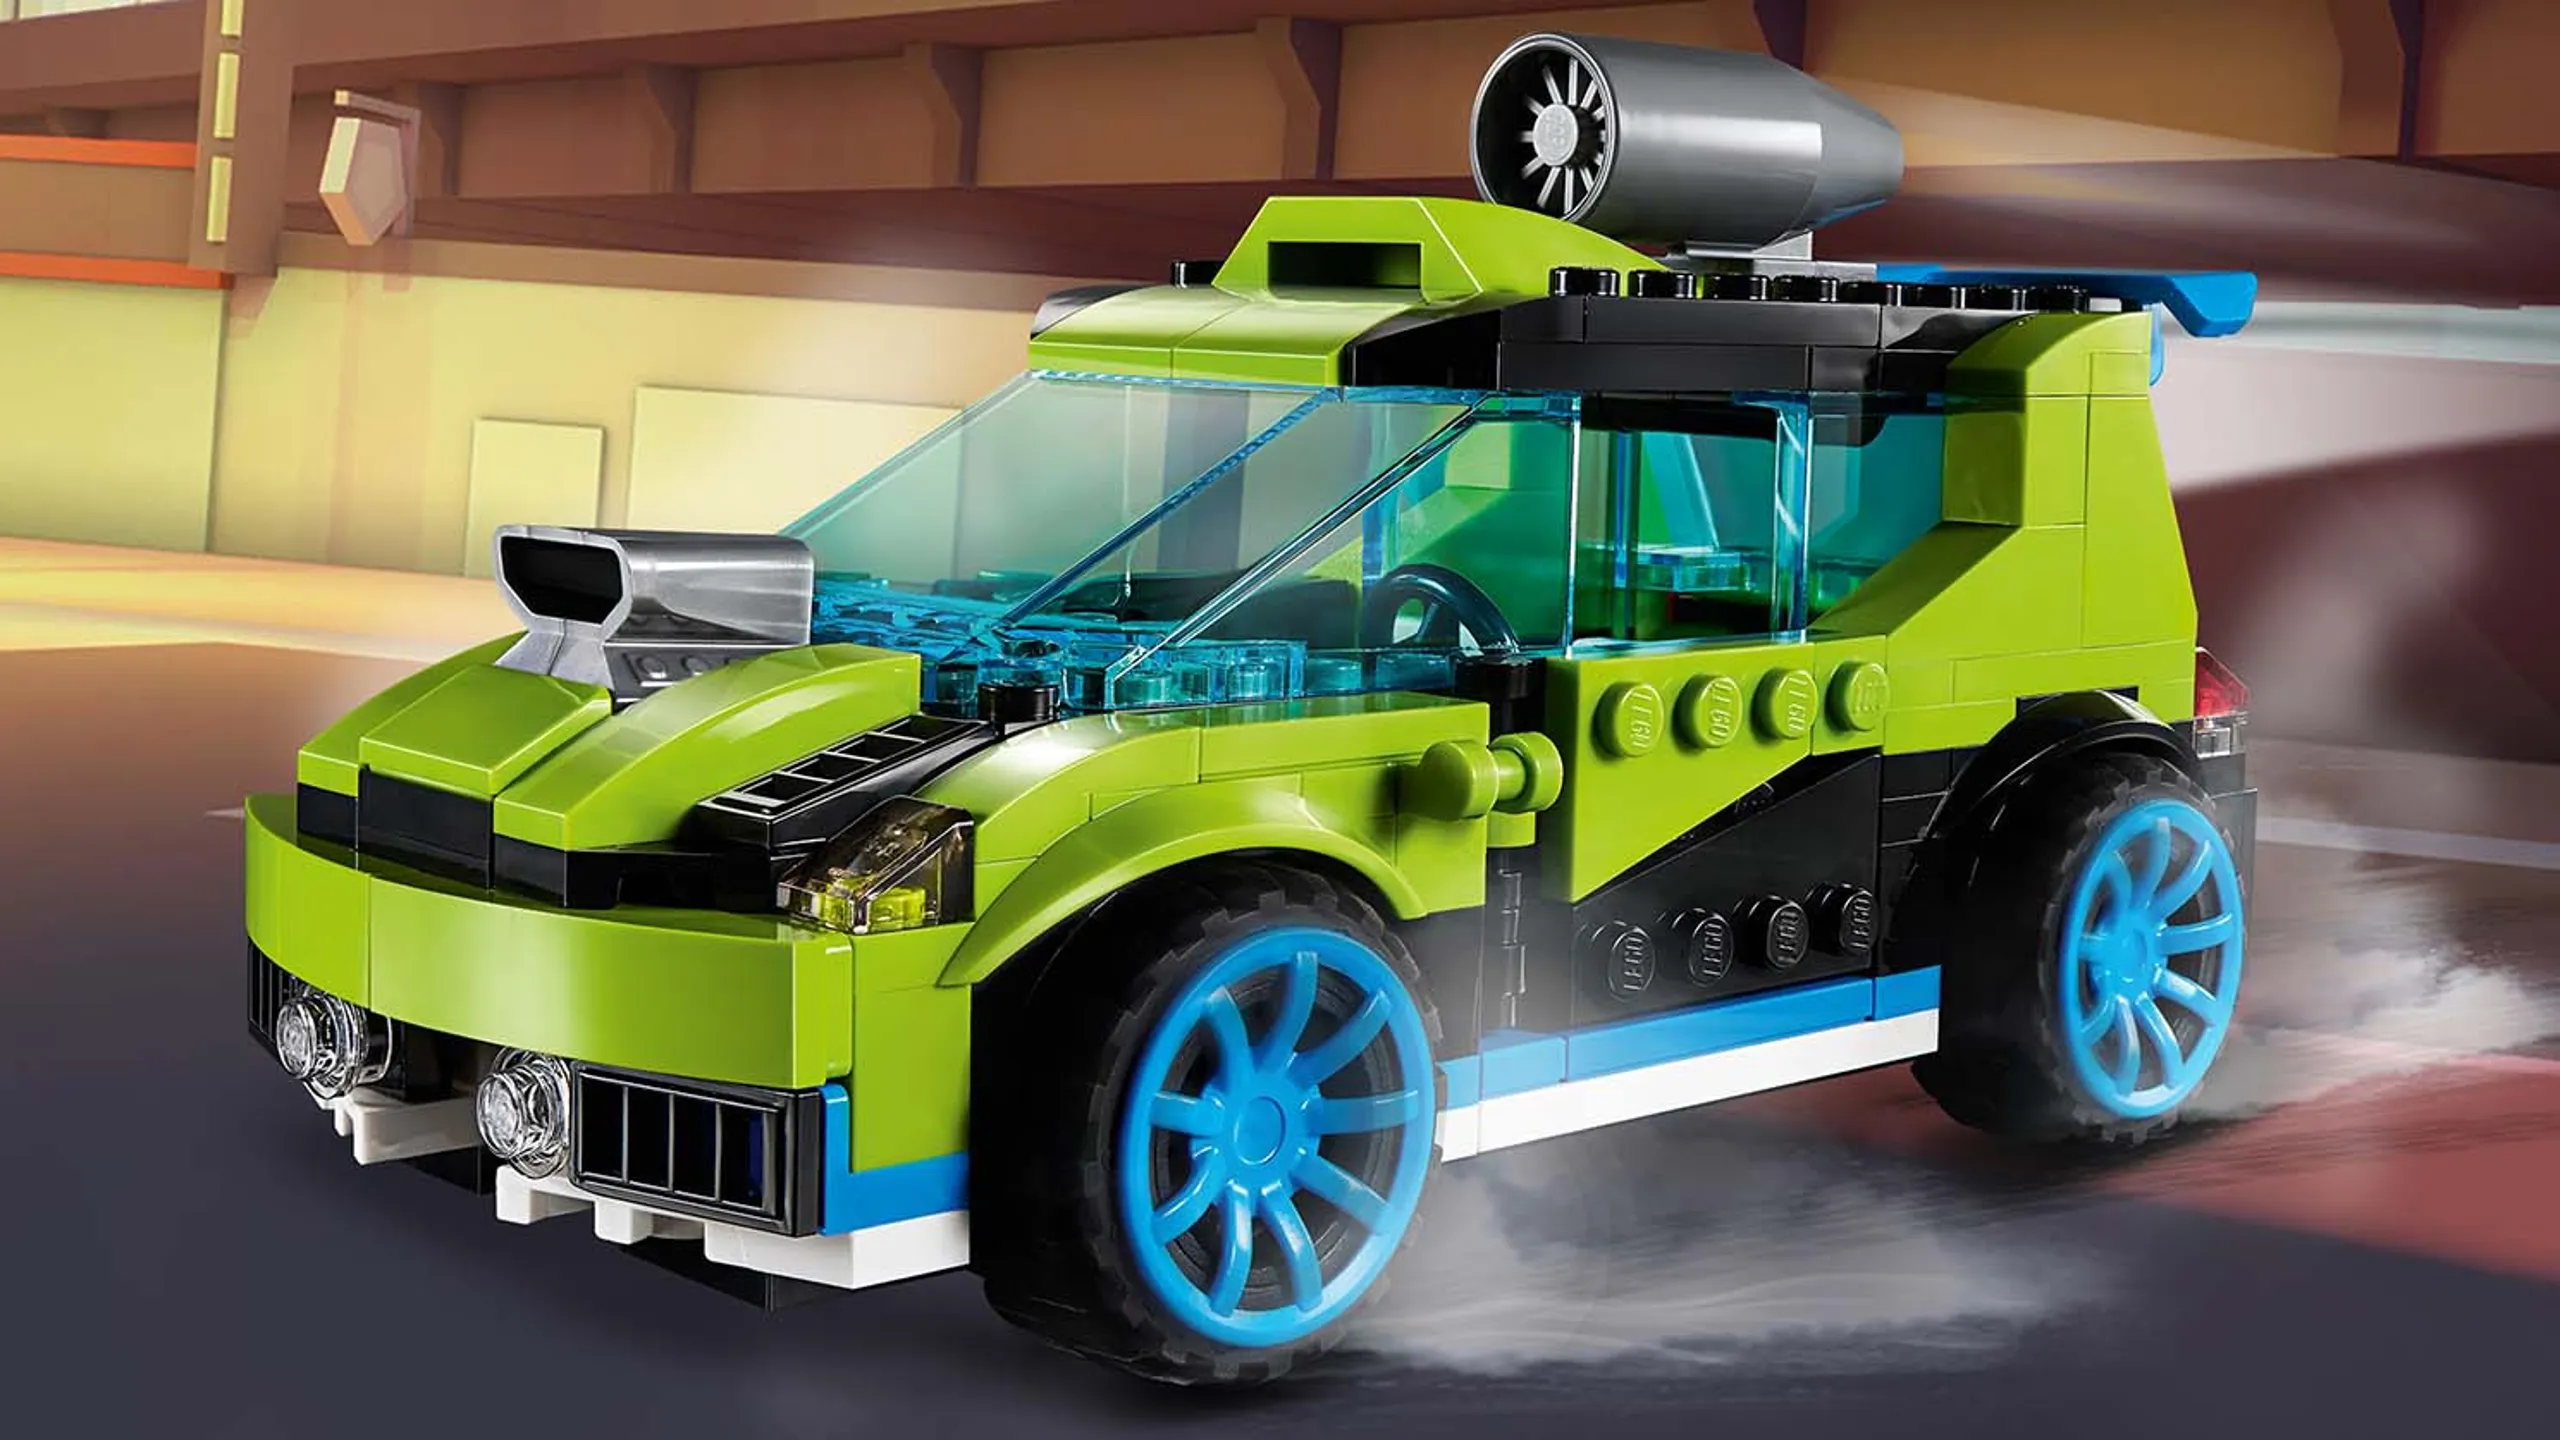 LEGO Creator 3 in 1 - 31074 Rocket Rally Car - Drive fast in this green car that has a rocket on the roof for extra speed.